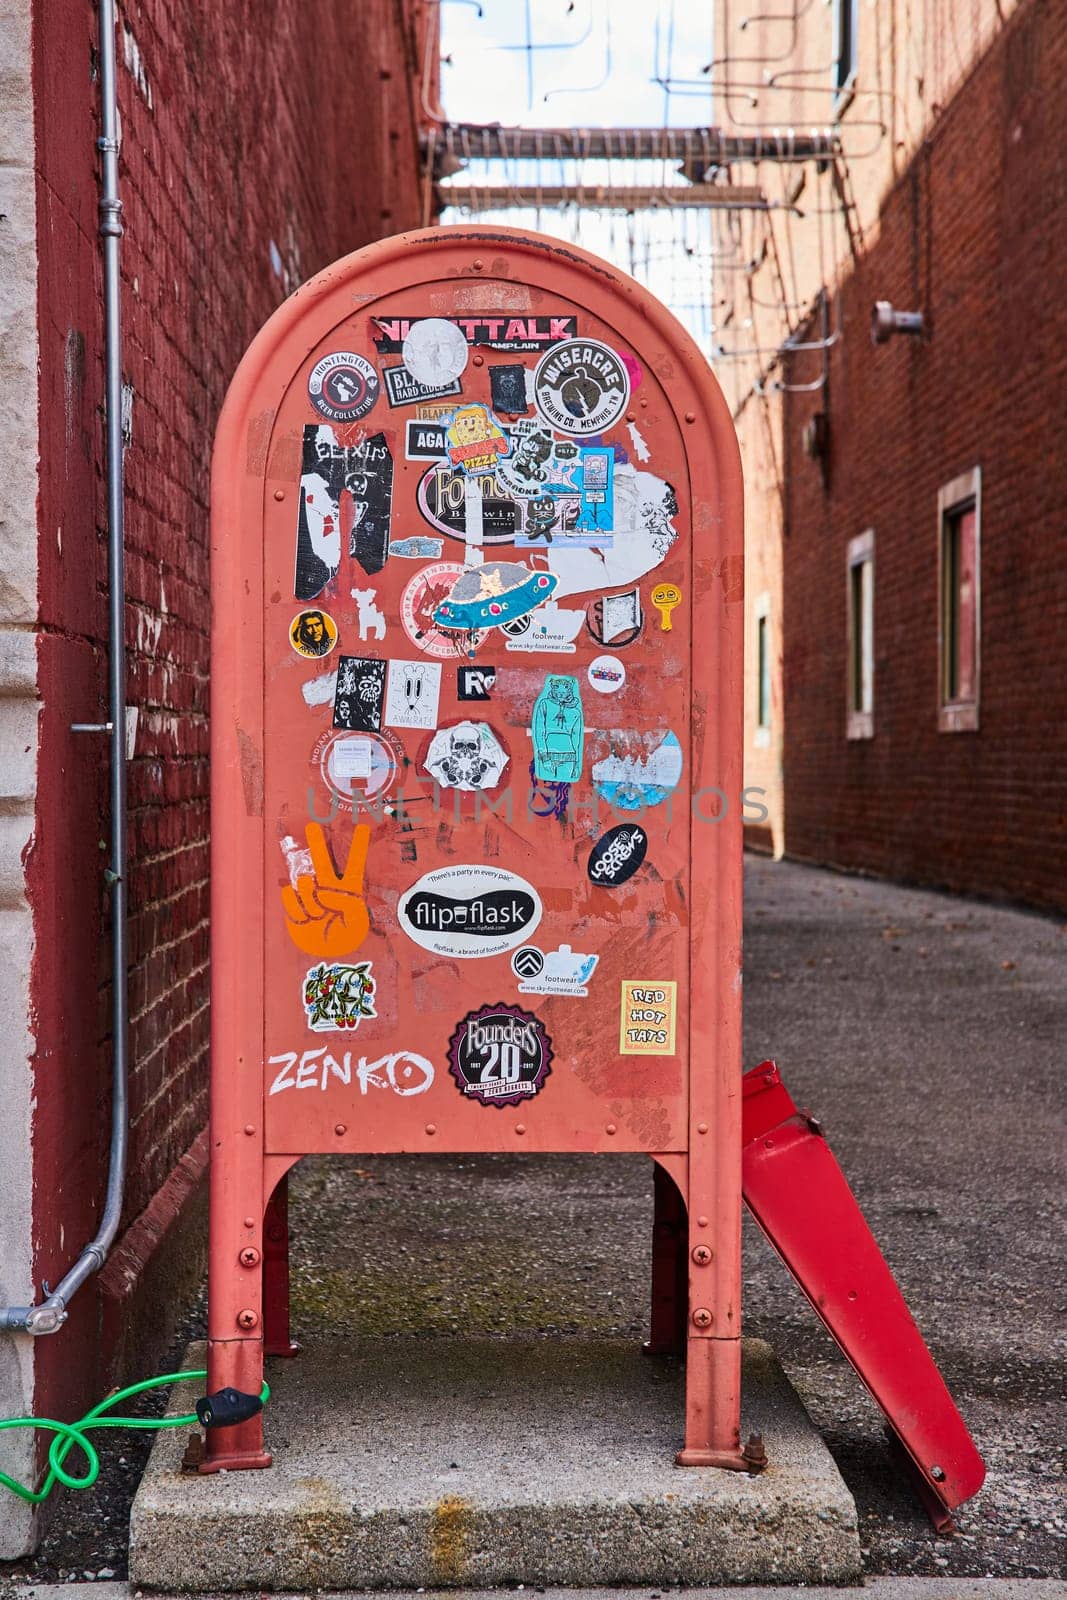 Sticker-Adorned Red Mailbox in Urban Alleyway, Eye-Level View by njproductions